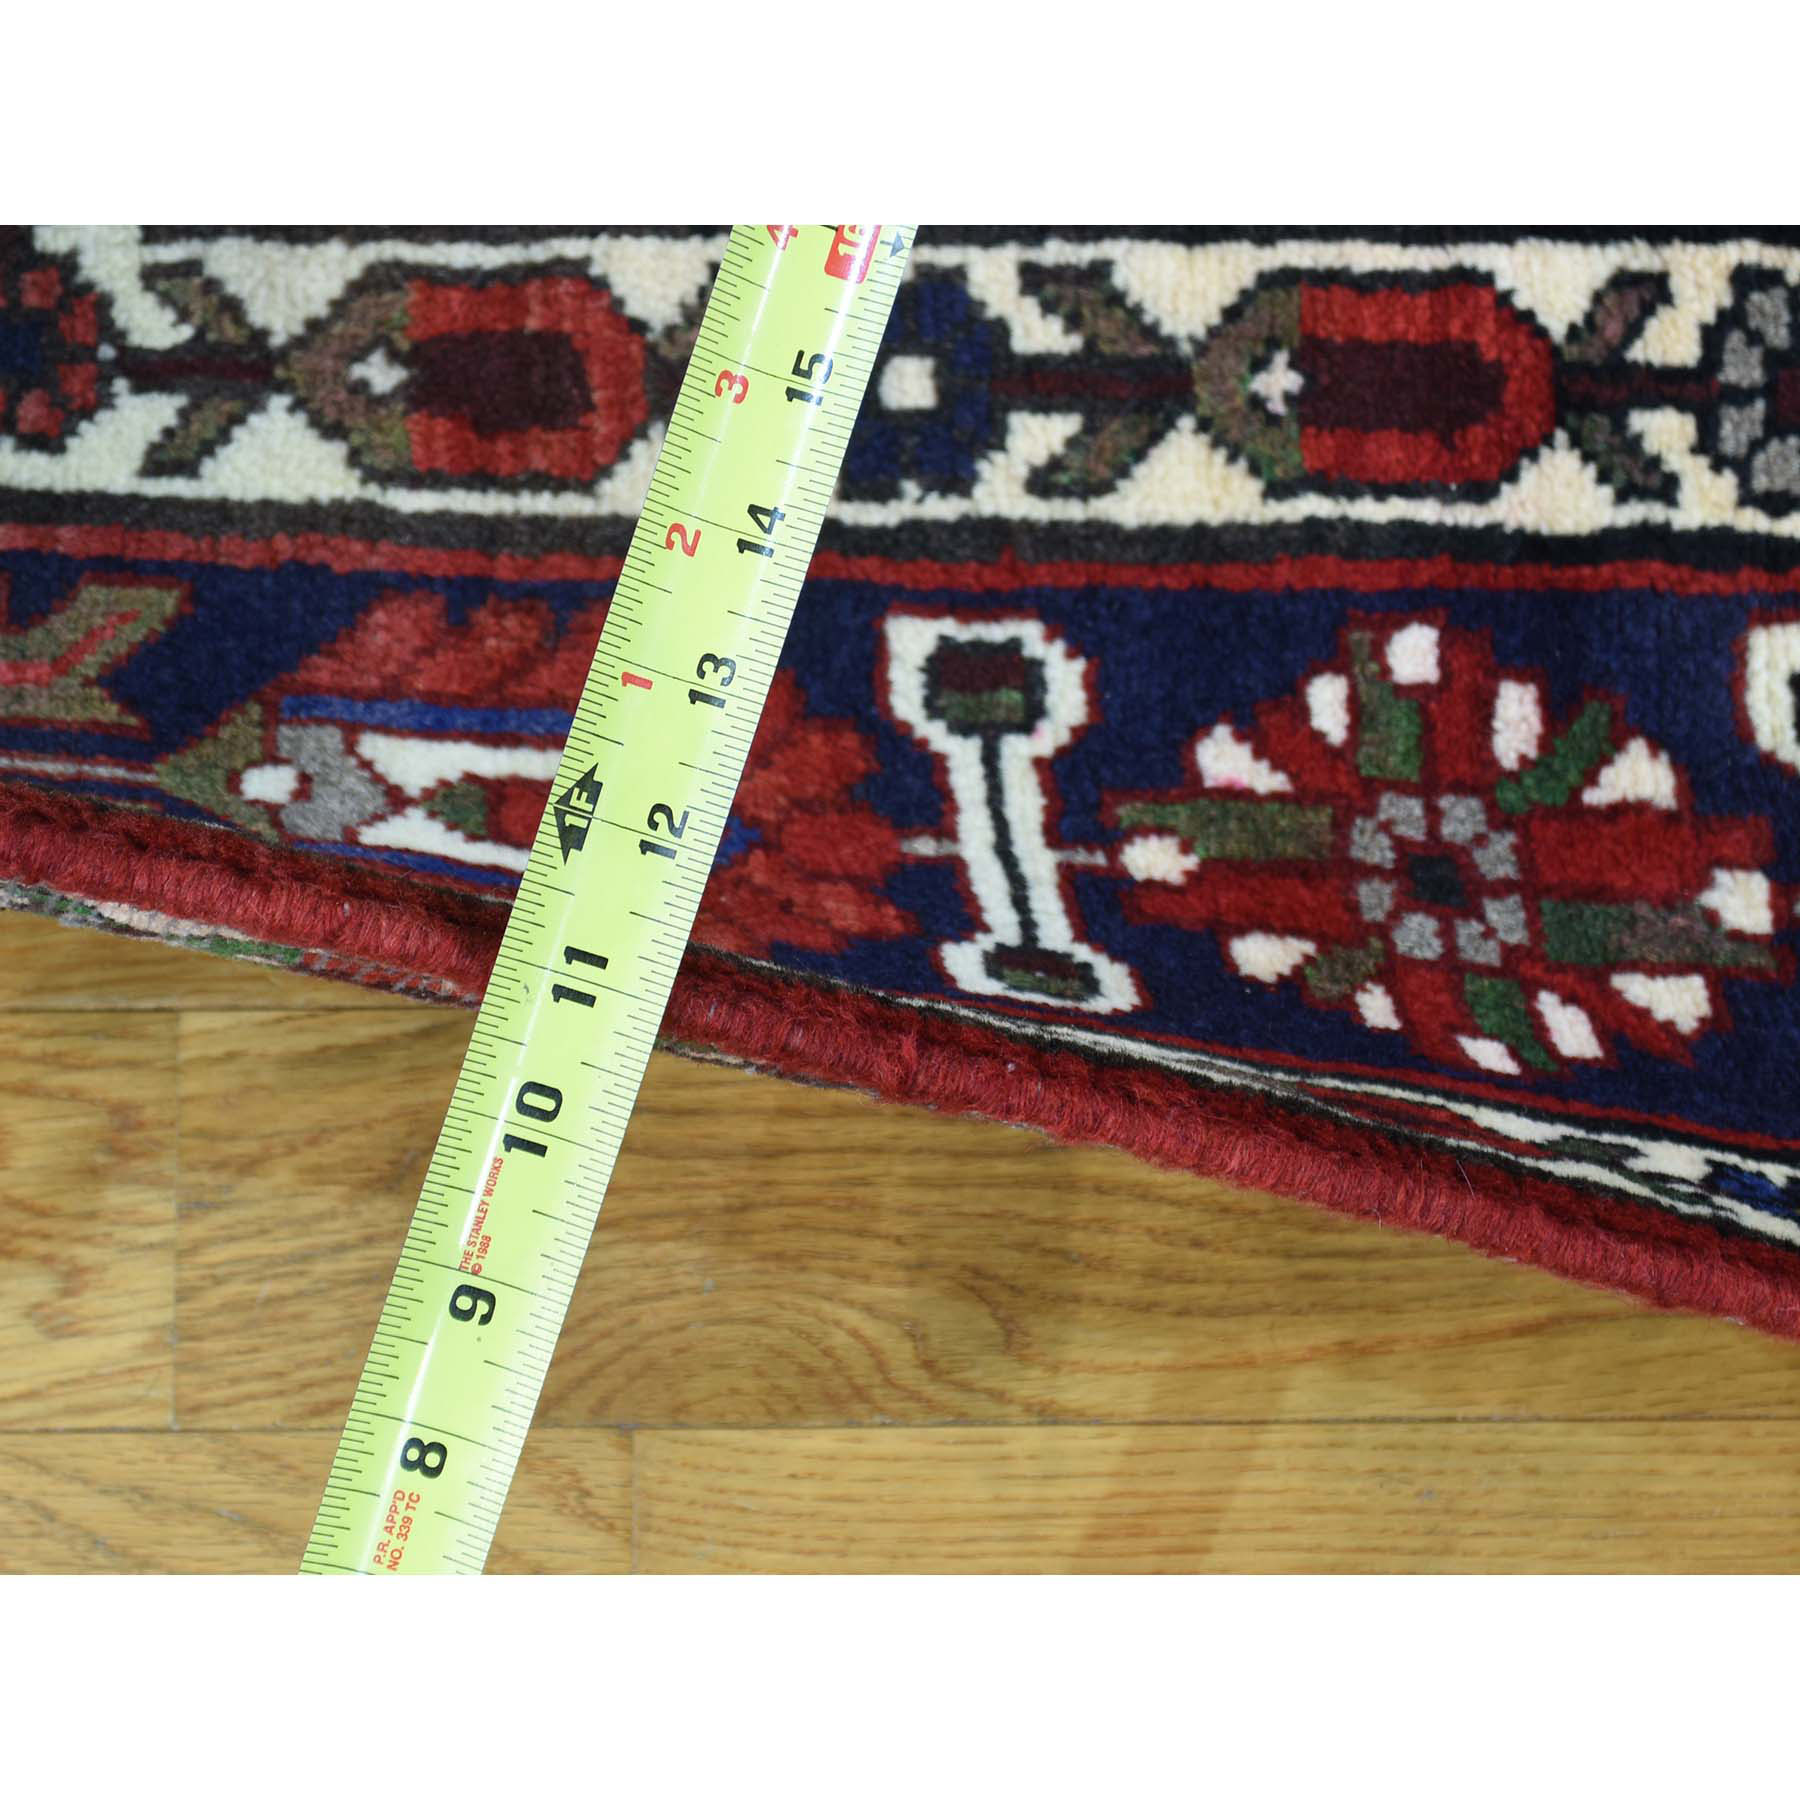 5-2 x7- On Clearance Semi Antique Persian Bakhtiari Mint Cond Hand-Knotted Carpet 